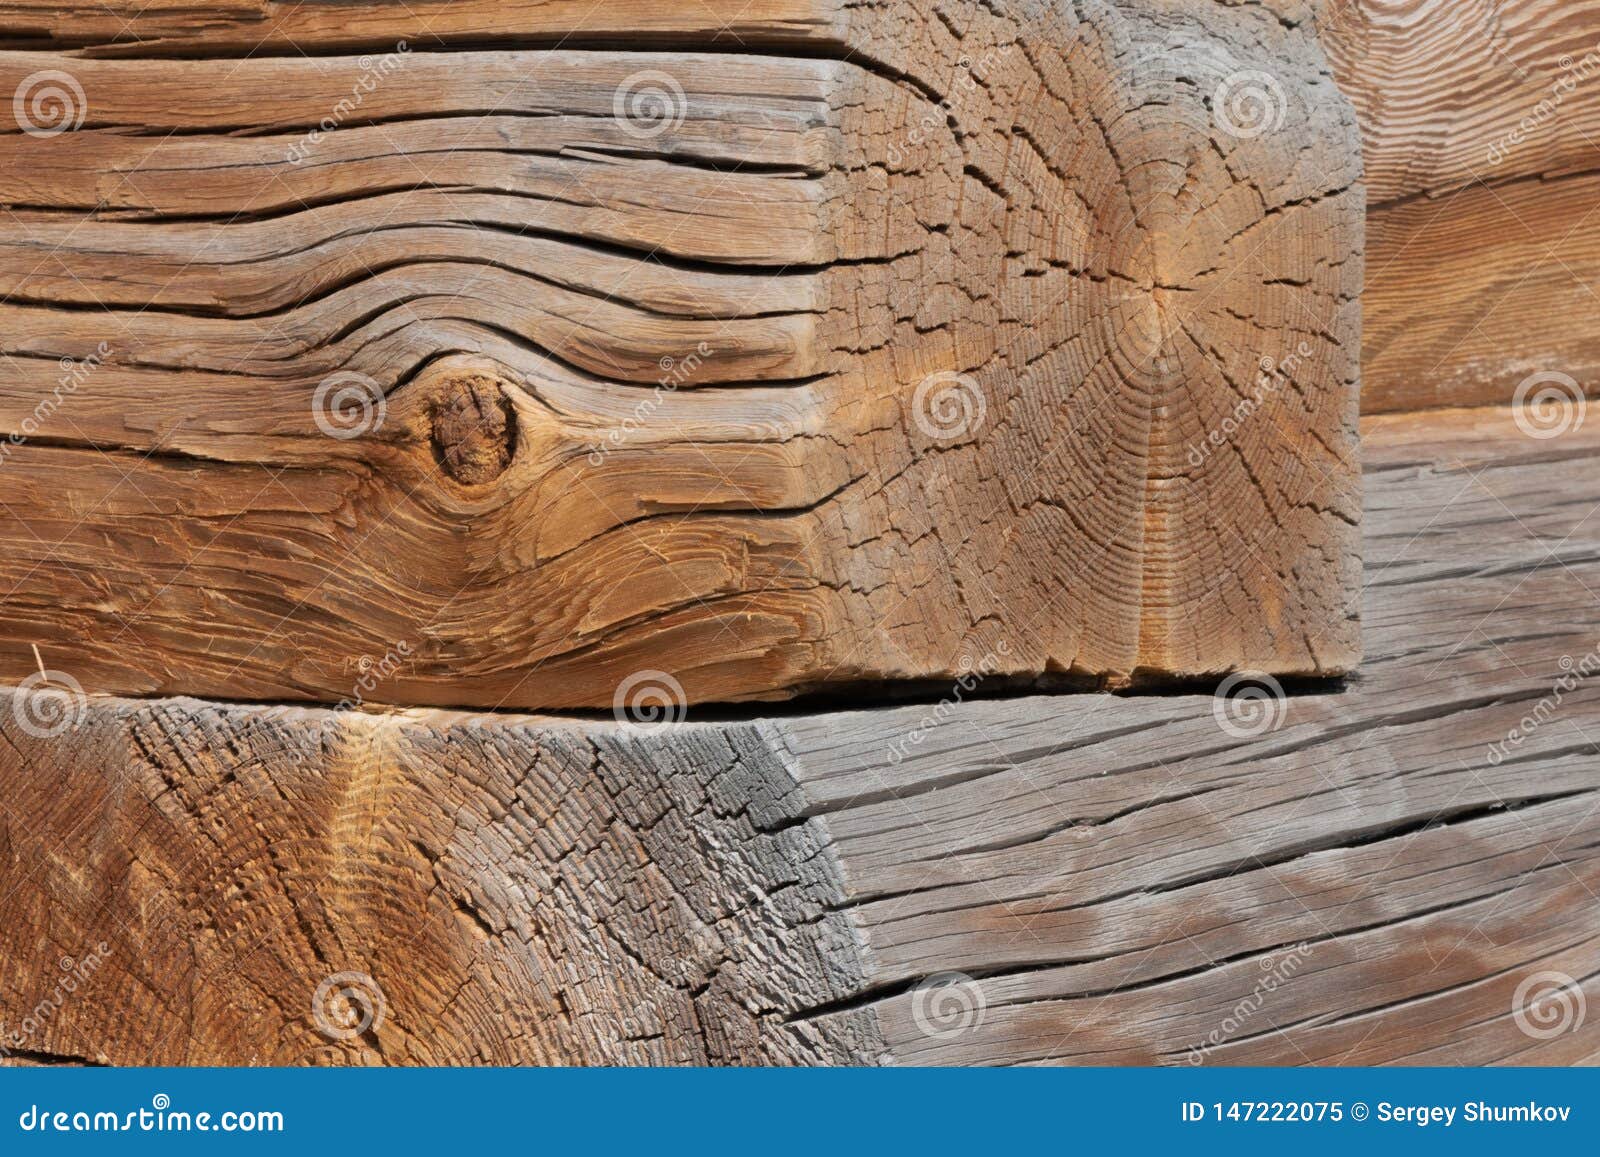 Wooden rounded logs